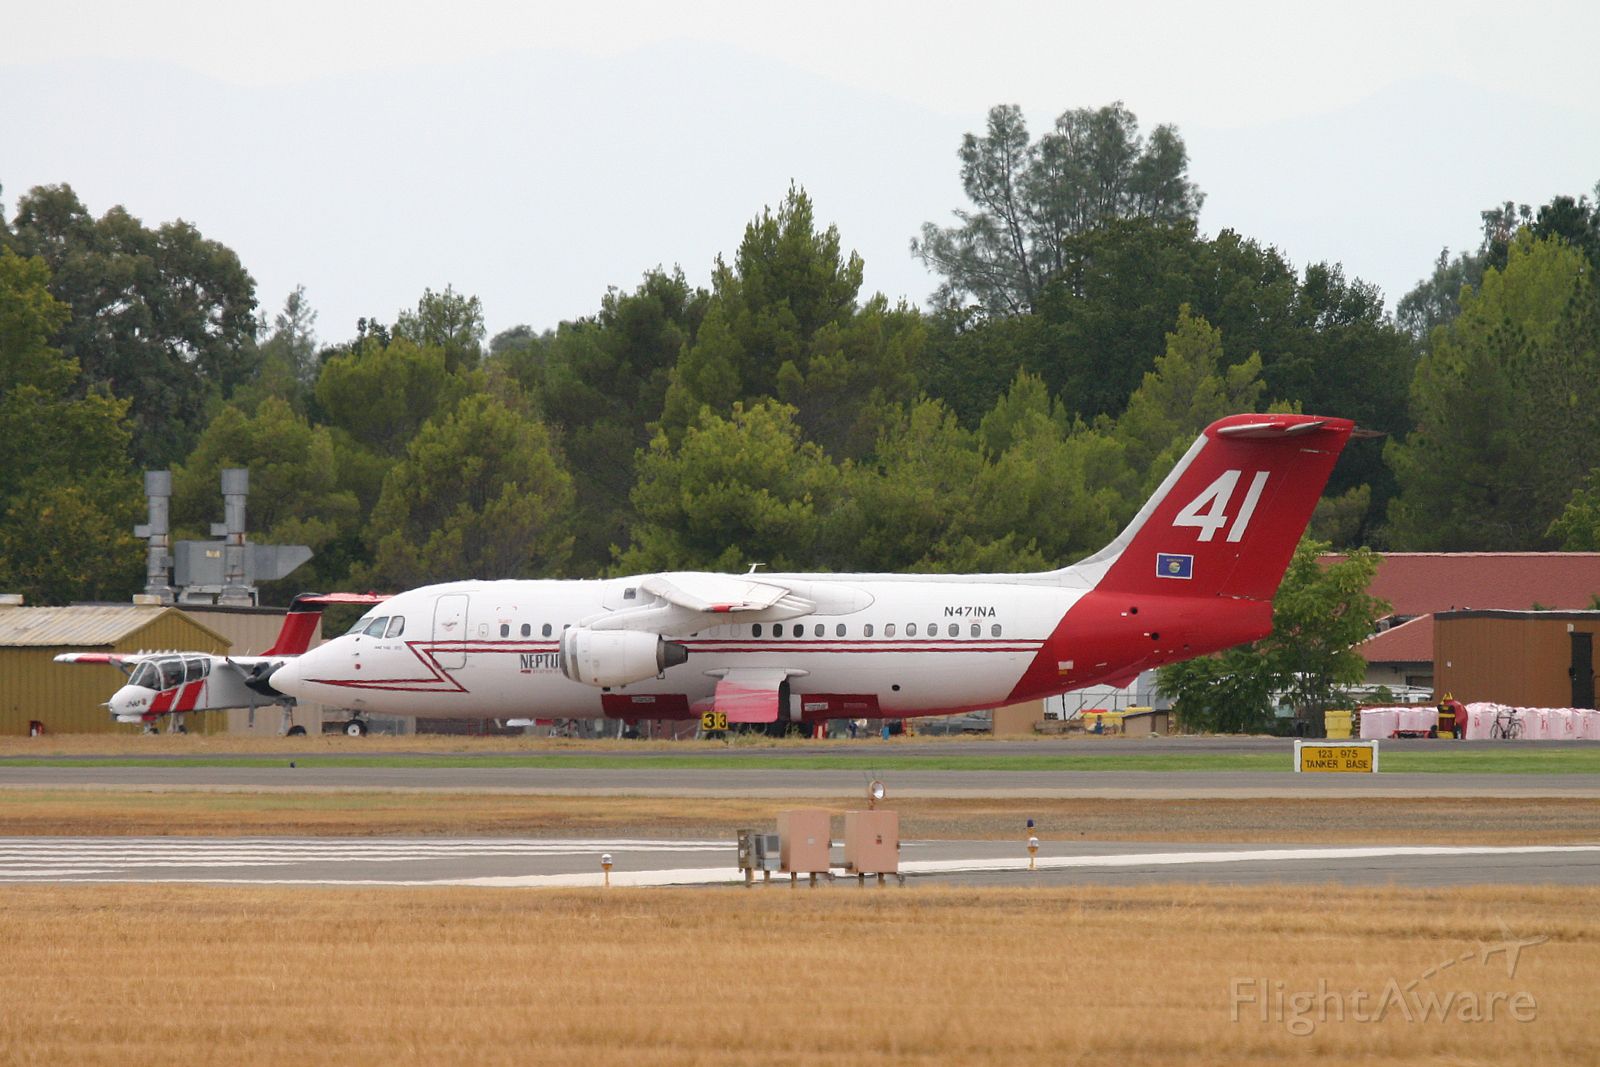 British Aerospace BAe-146-200 (N471NA) - KRDD - Tanker 41 of Neptune Aviation at Redding Aug 2014 during the Hat Creek Fire and 3 other major fires that summer in NE California.br /br /Serial number 2136 LN:136br /Type Bae 146-200Abr /First flight date 30/06/1989br /Test registration G5-136br /Plane age 27 years